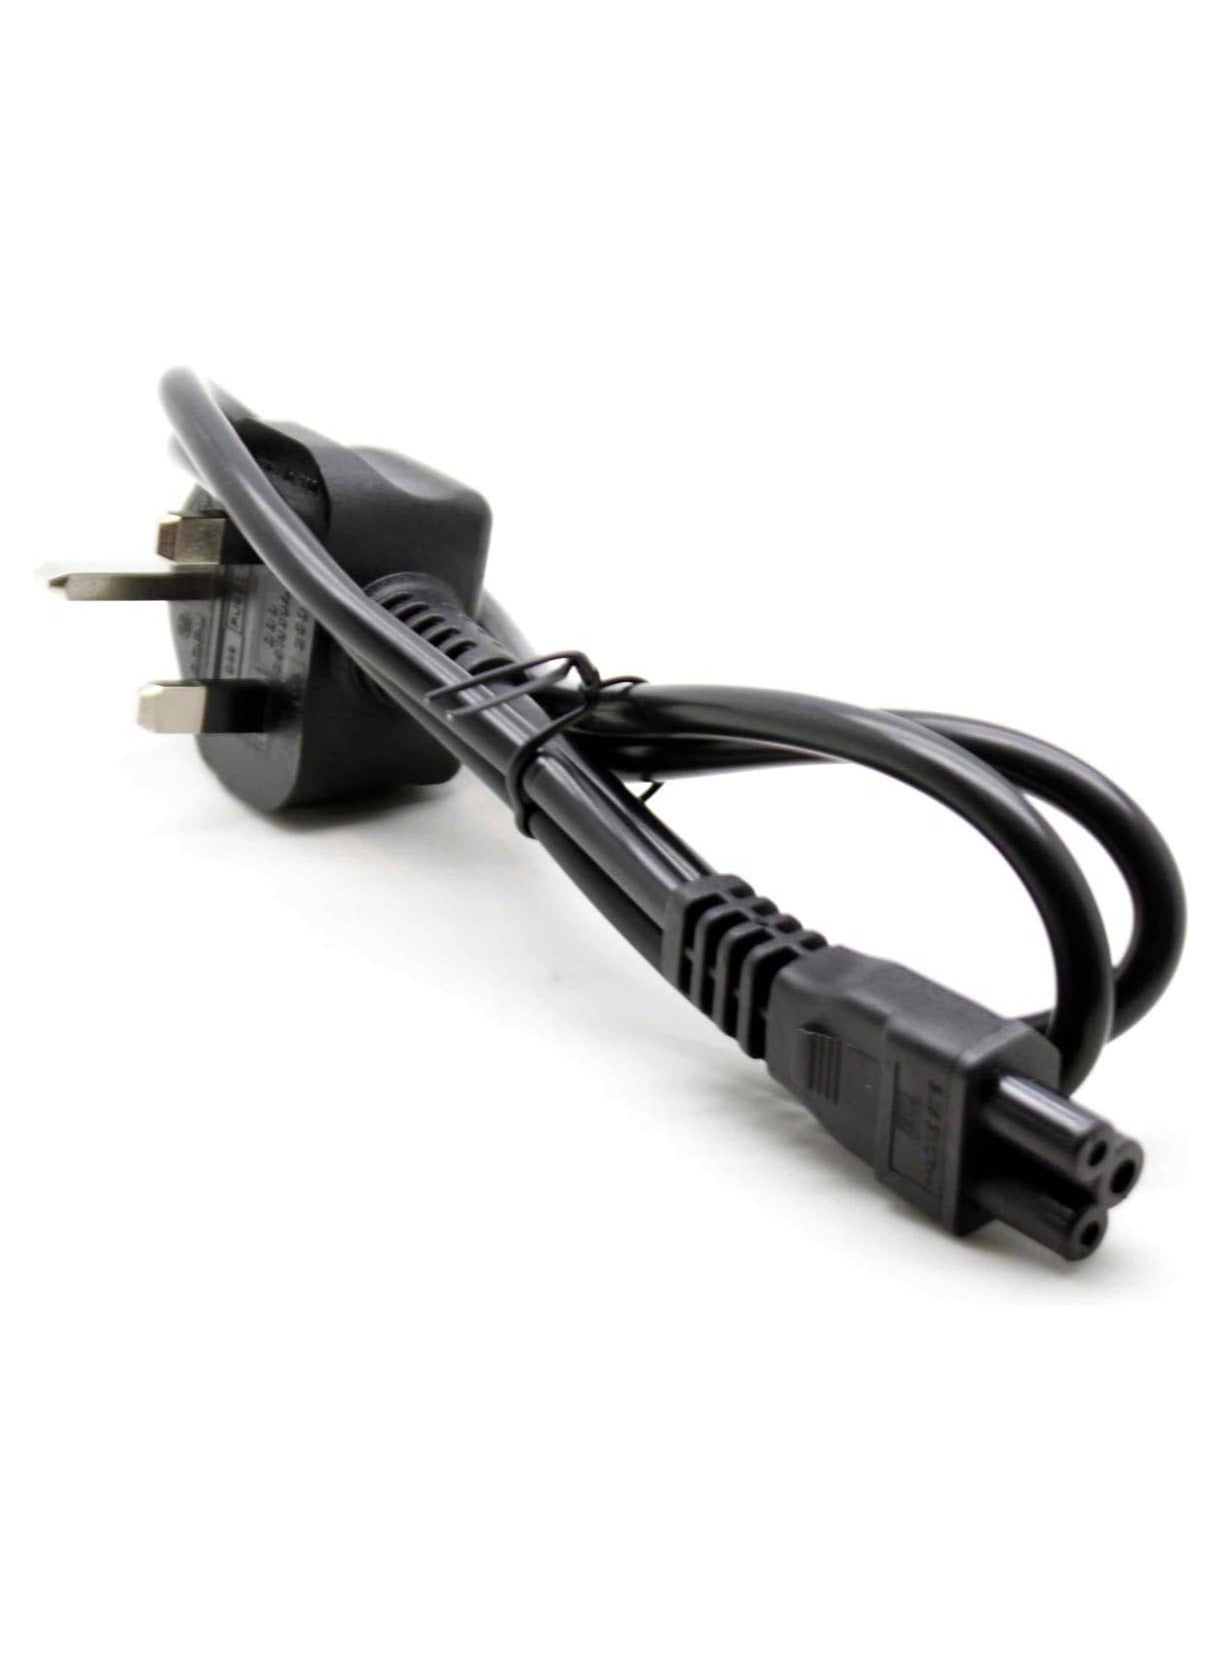 19.5V/9.23A 180W Dell Inspiron 15 7577, ALIENWARE 13 R3, Precision 15 7520 Laptop AC Replacement Adapter DWG4P 0DWG4P